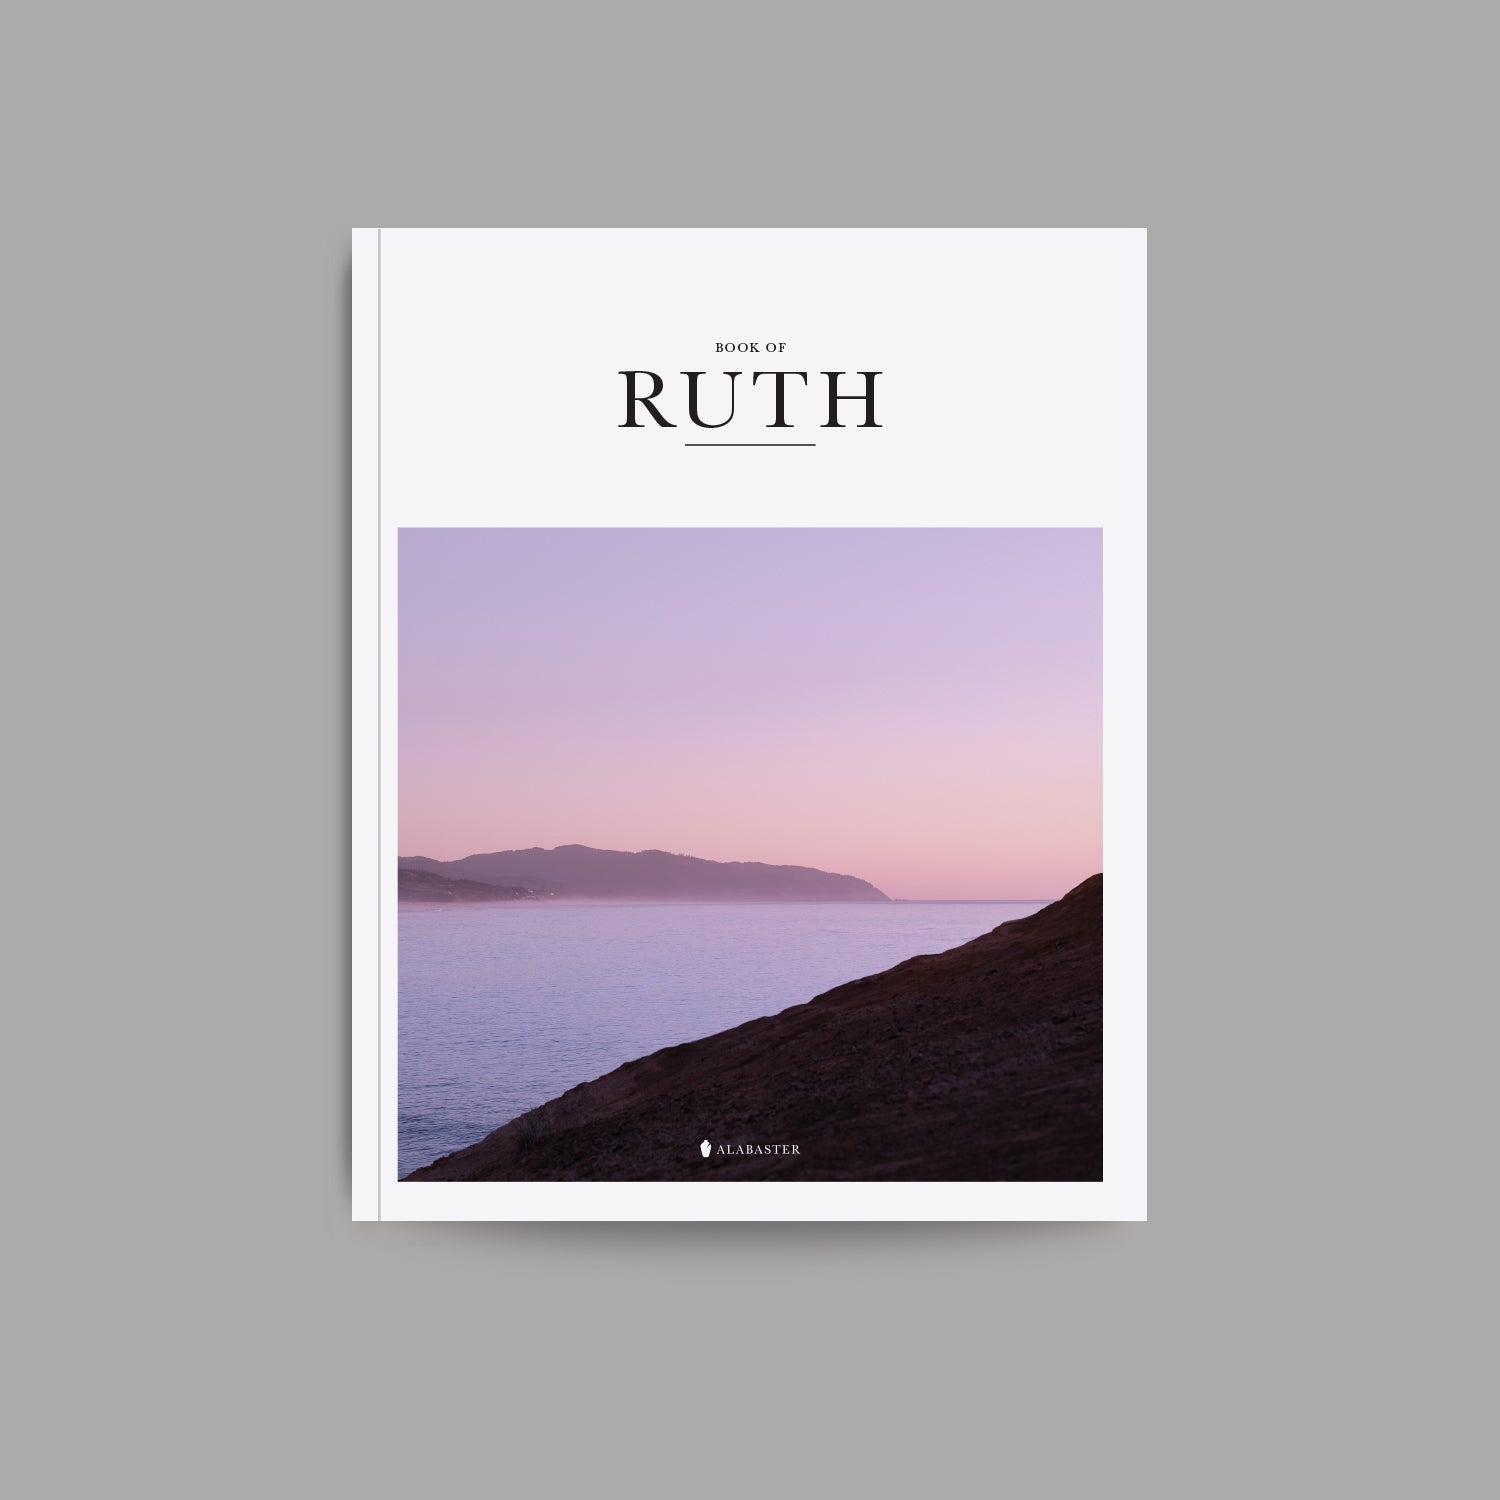 The Book of Ruth softcover